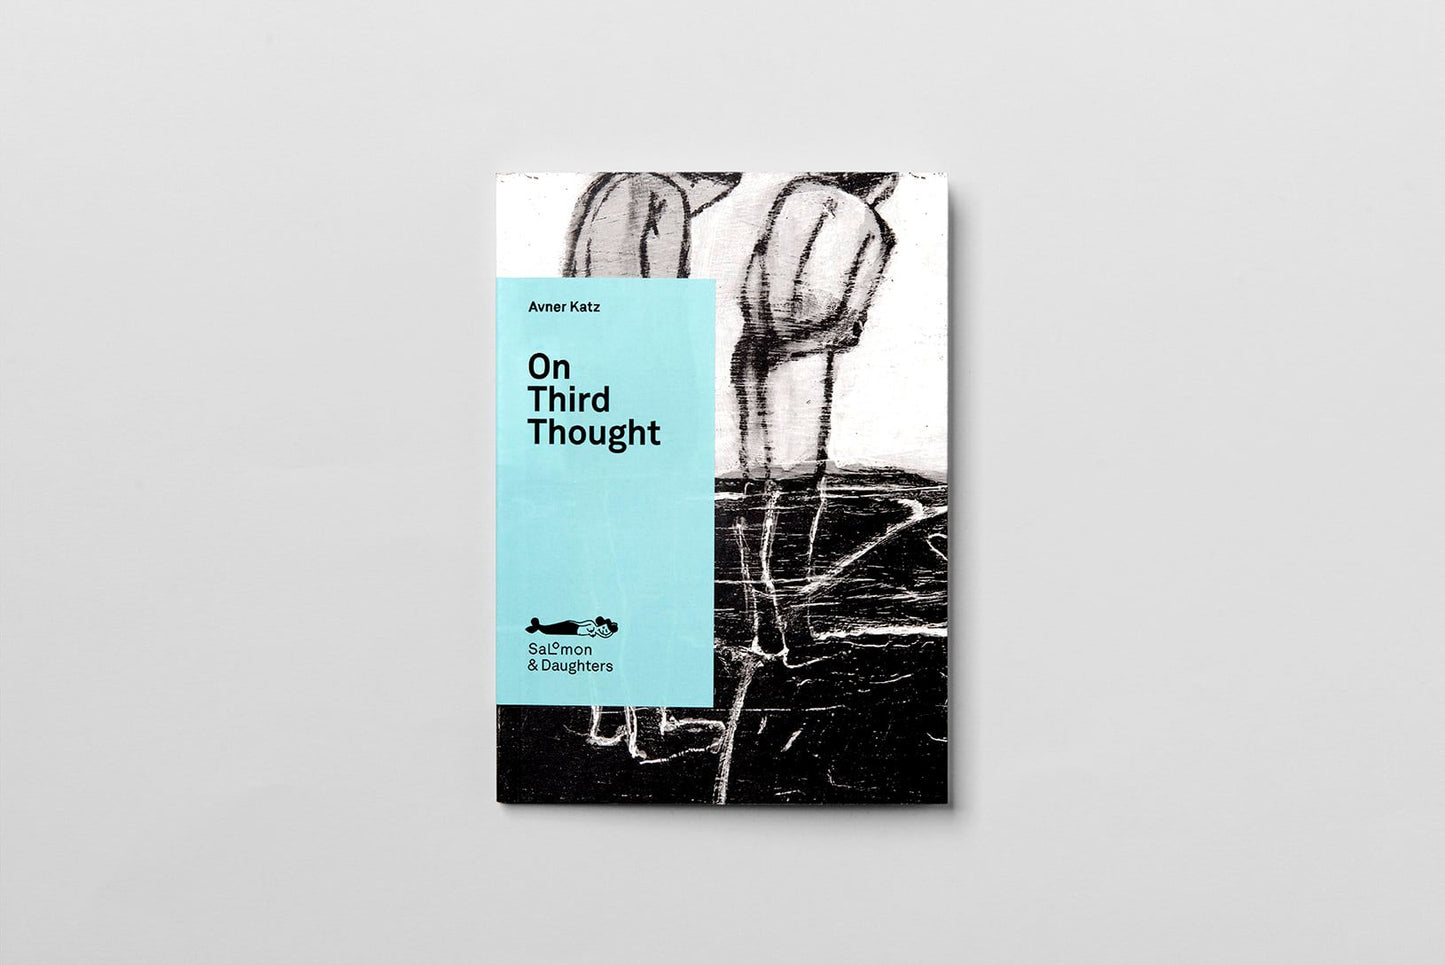 On Third Thought